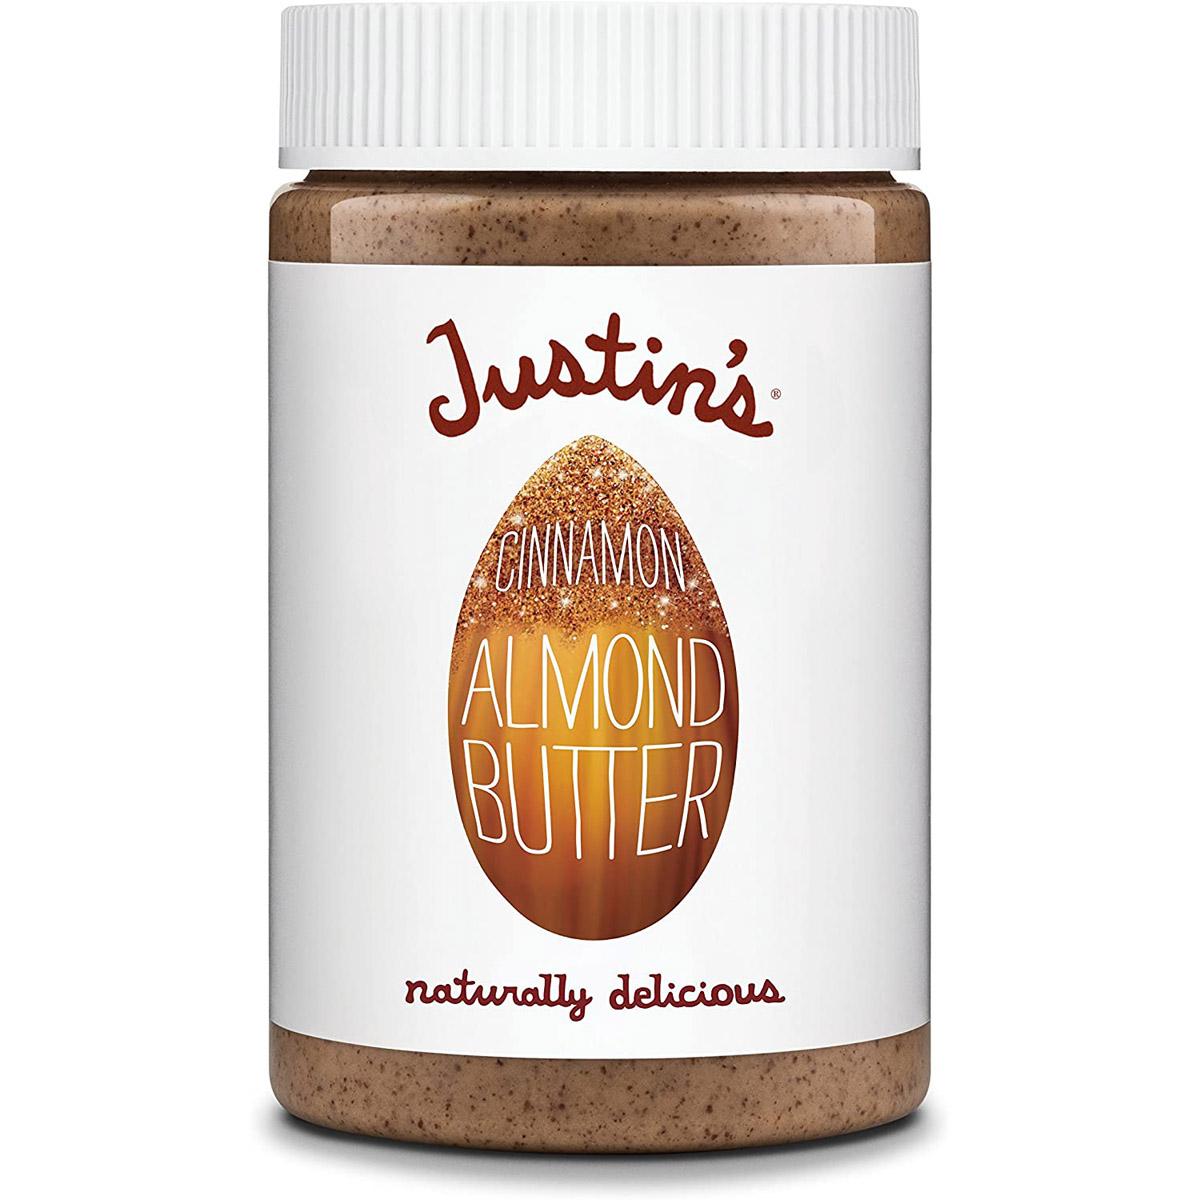 16oz Justins Cinnamon Almond Butter for $6.45 Shipped